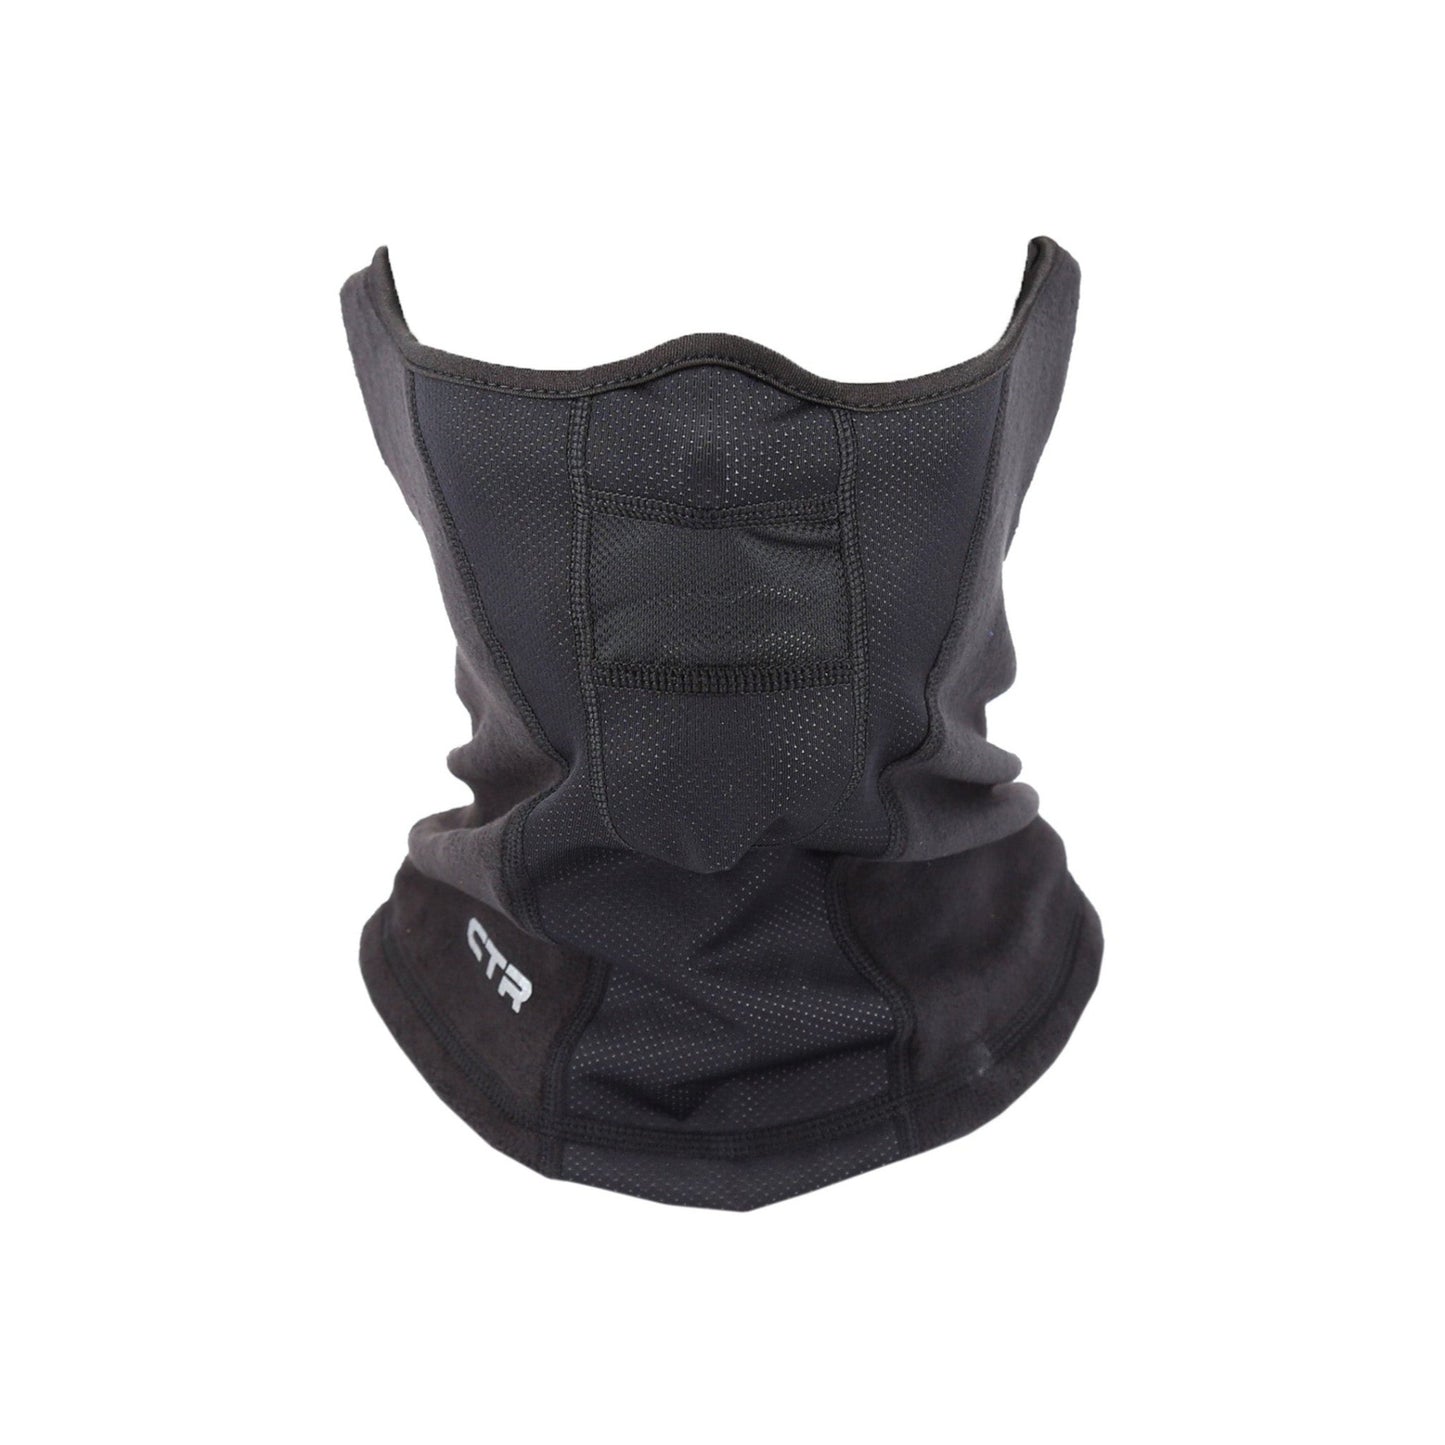 Tempest Neck/Face Protector Style:1685 - CTR Outdoors